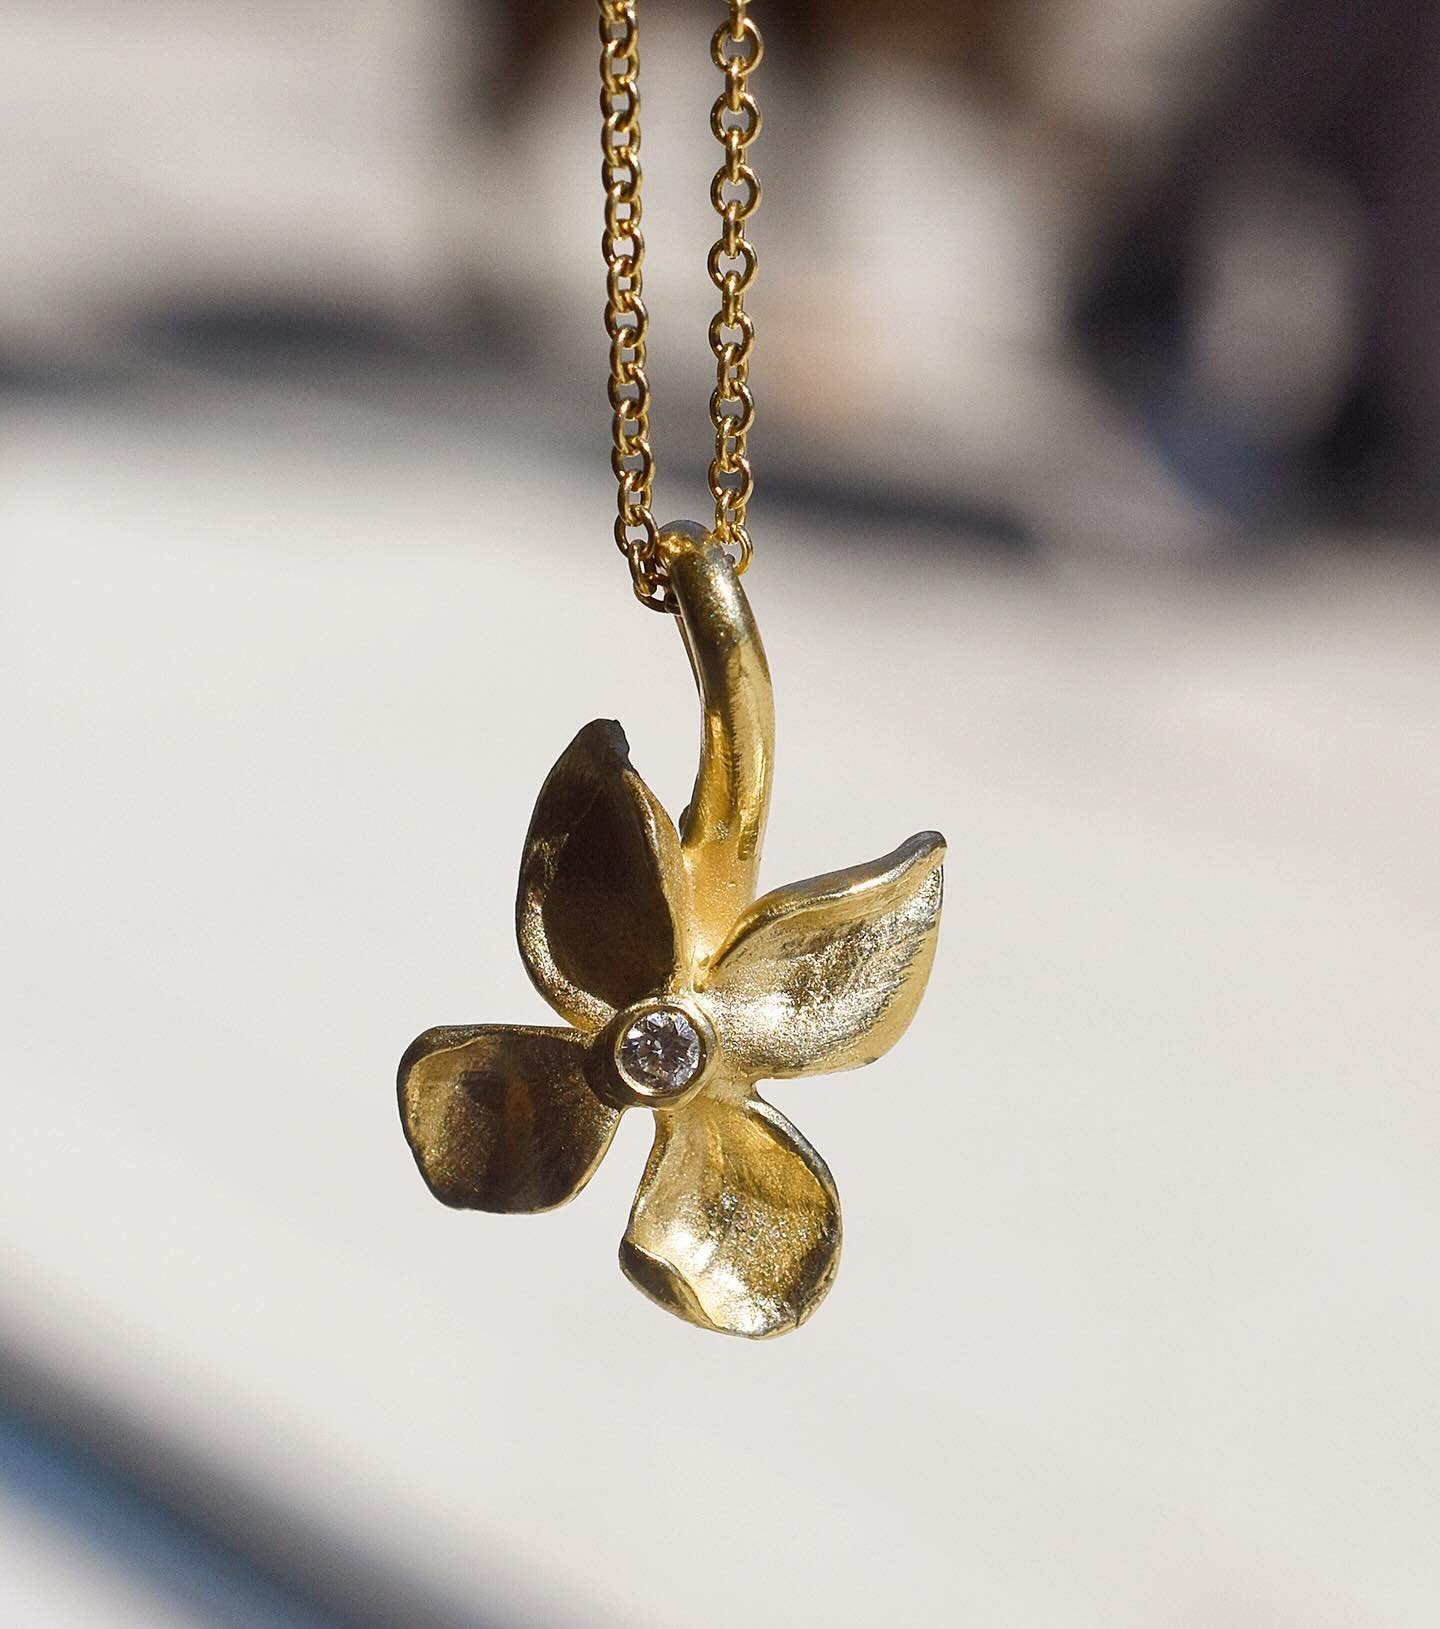 The dogwood pendant in 18k yellow gold 🌸✨